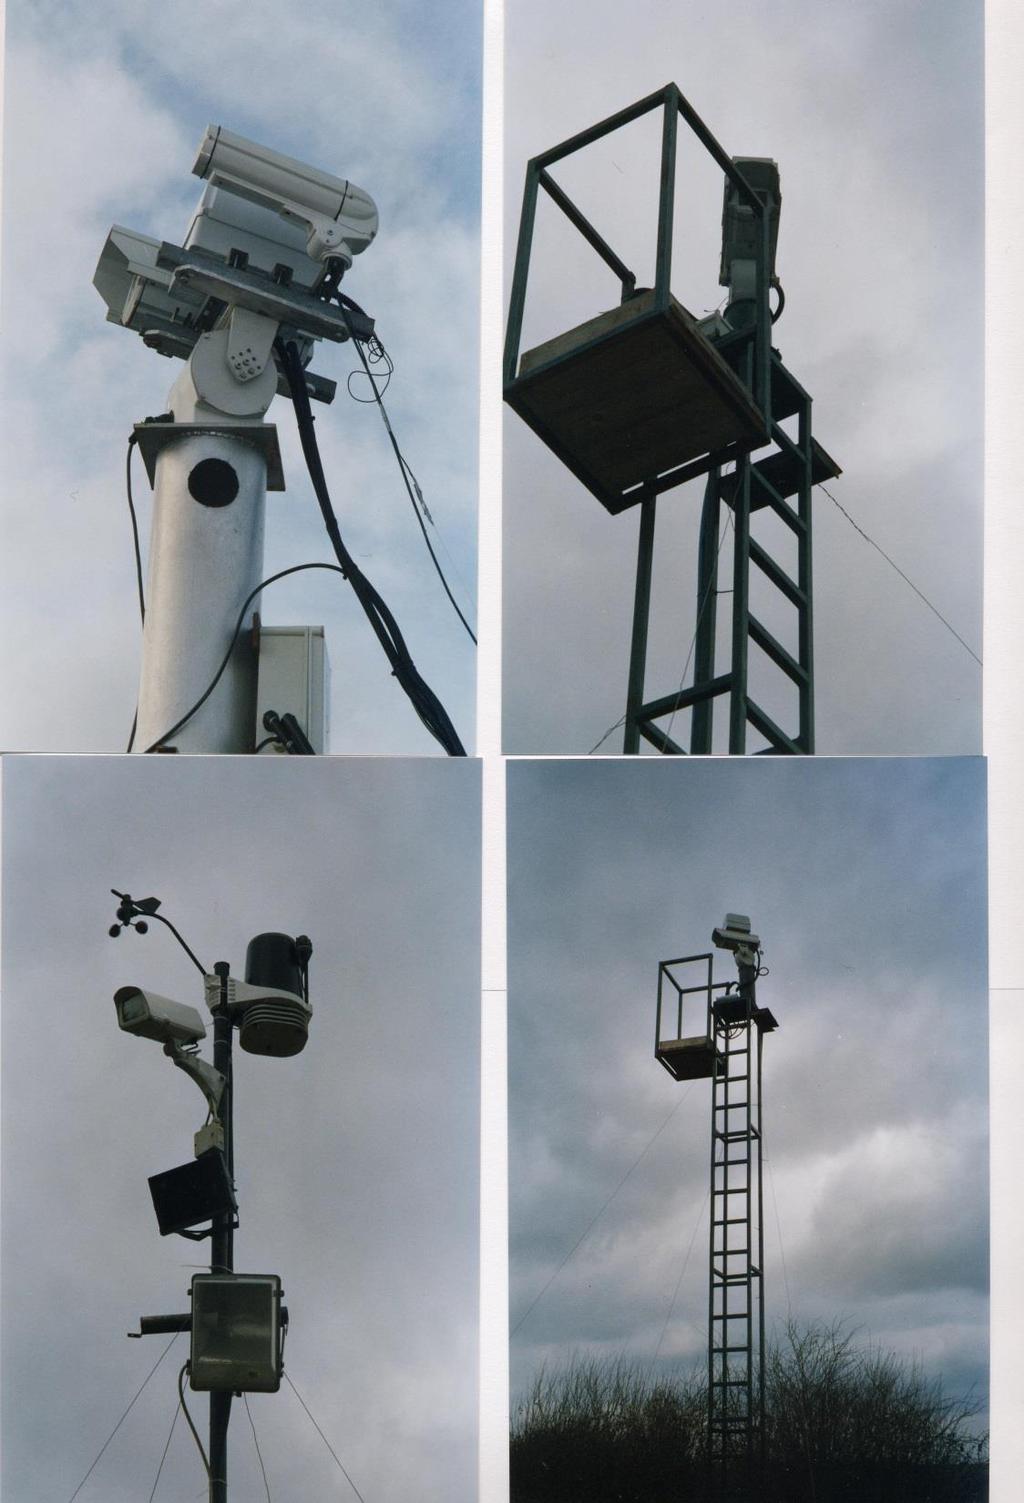 2005: Kingsland All-Sky Cameras and Tracking facility Operates on 24/7, FOV 180 degrees. 2 tracking platforms Far left: 2005. Tracking platform with 200 mm F.L lens and camera.